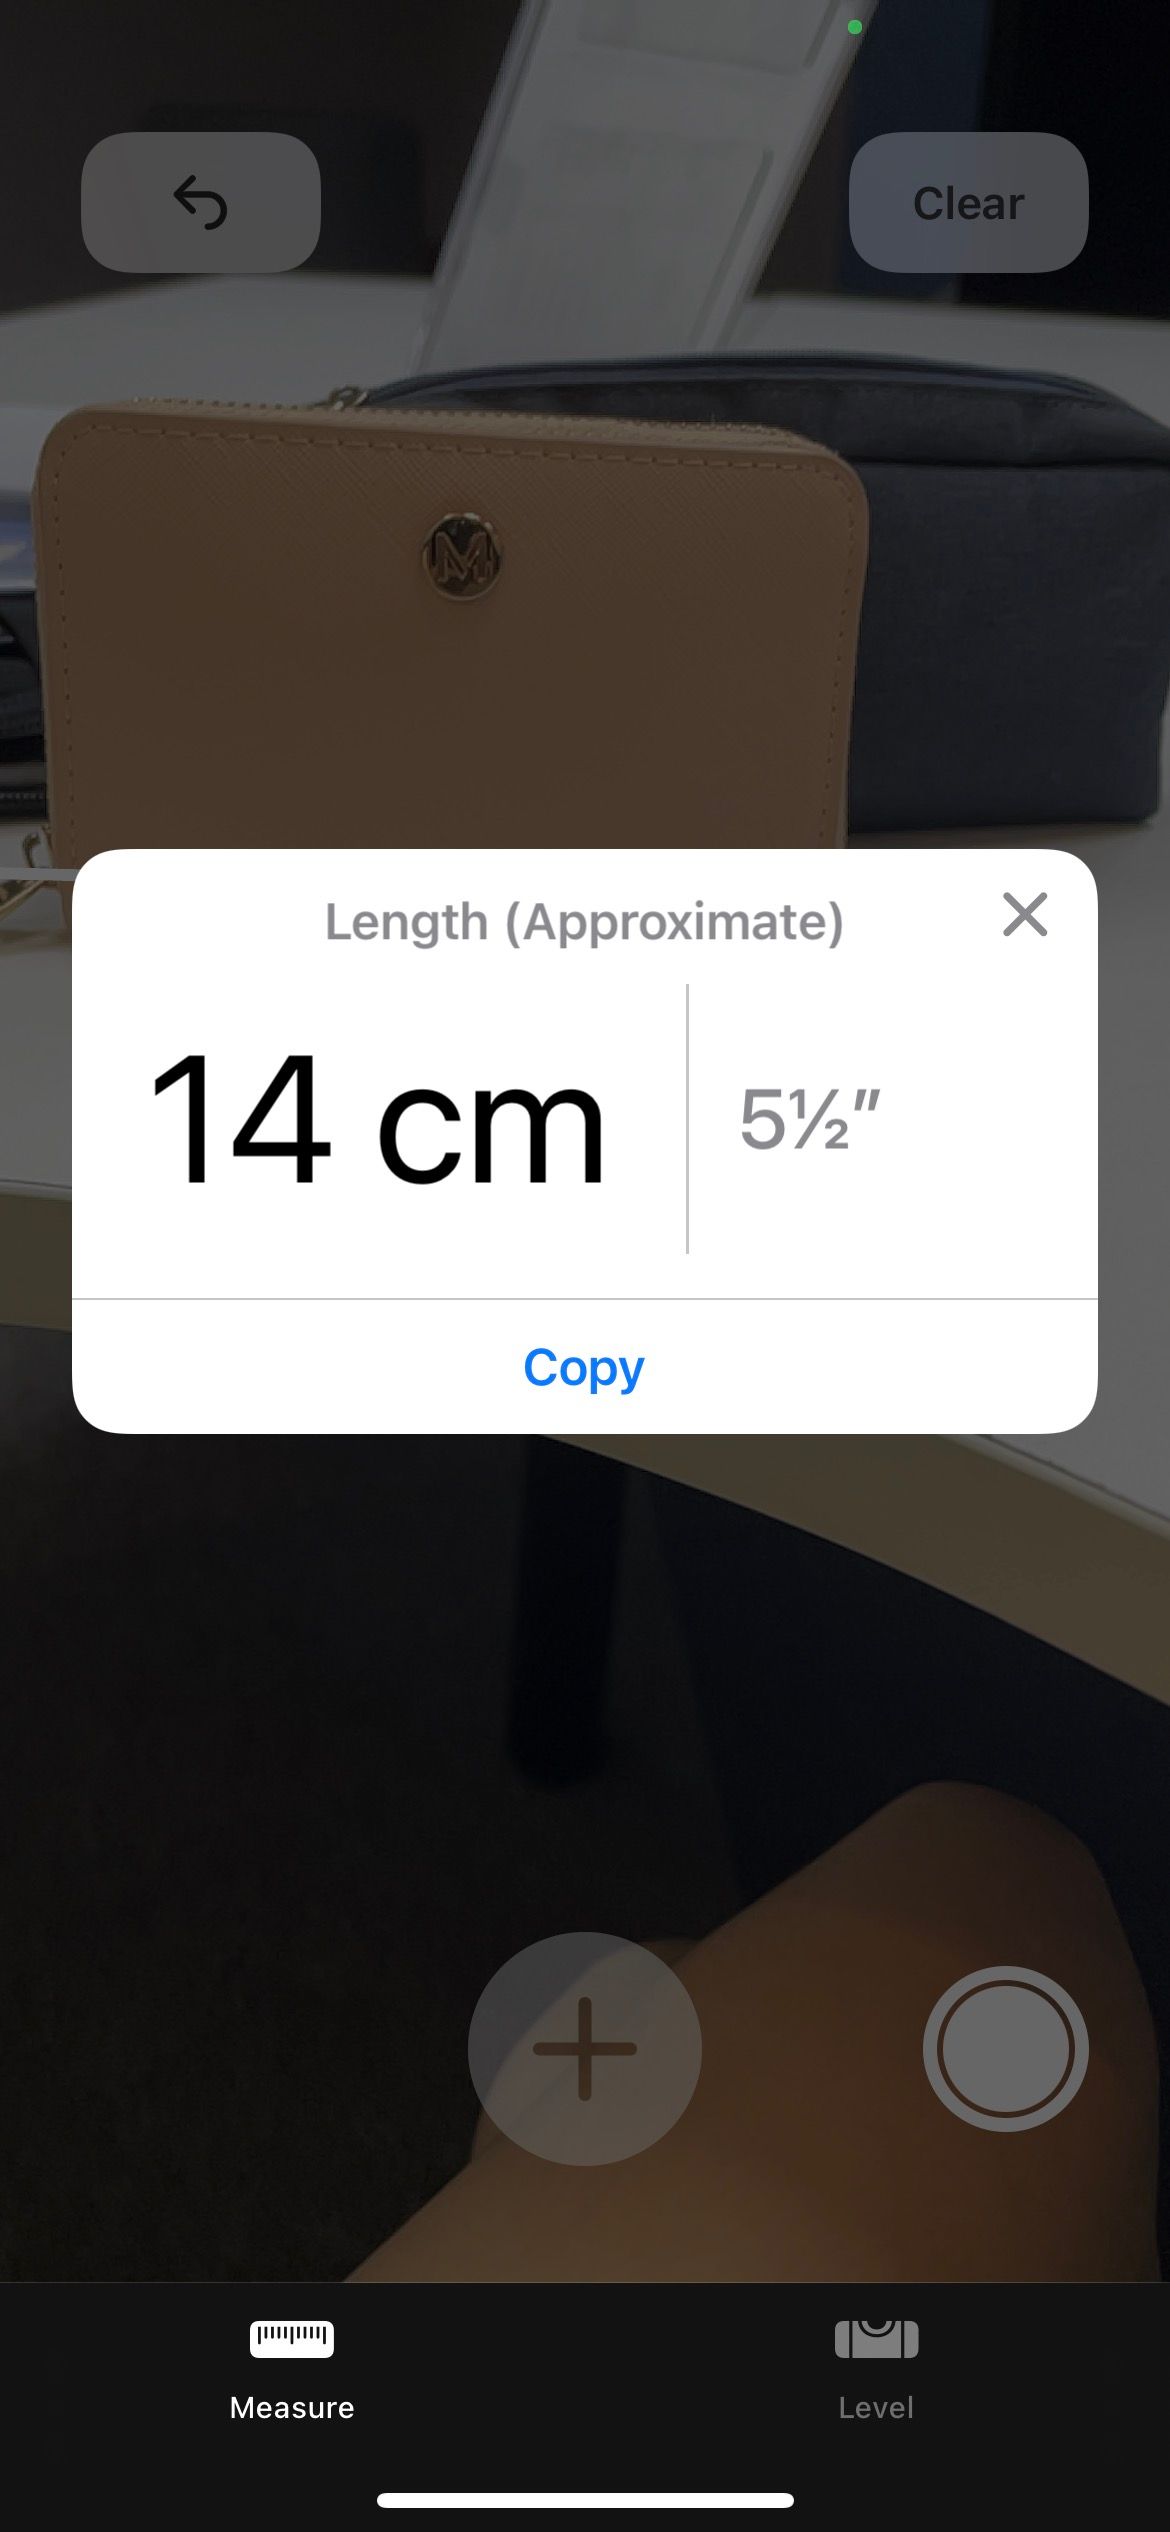 view measurement in centimeters and inches in iphone measure app